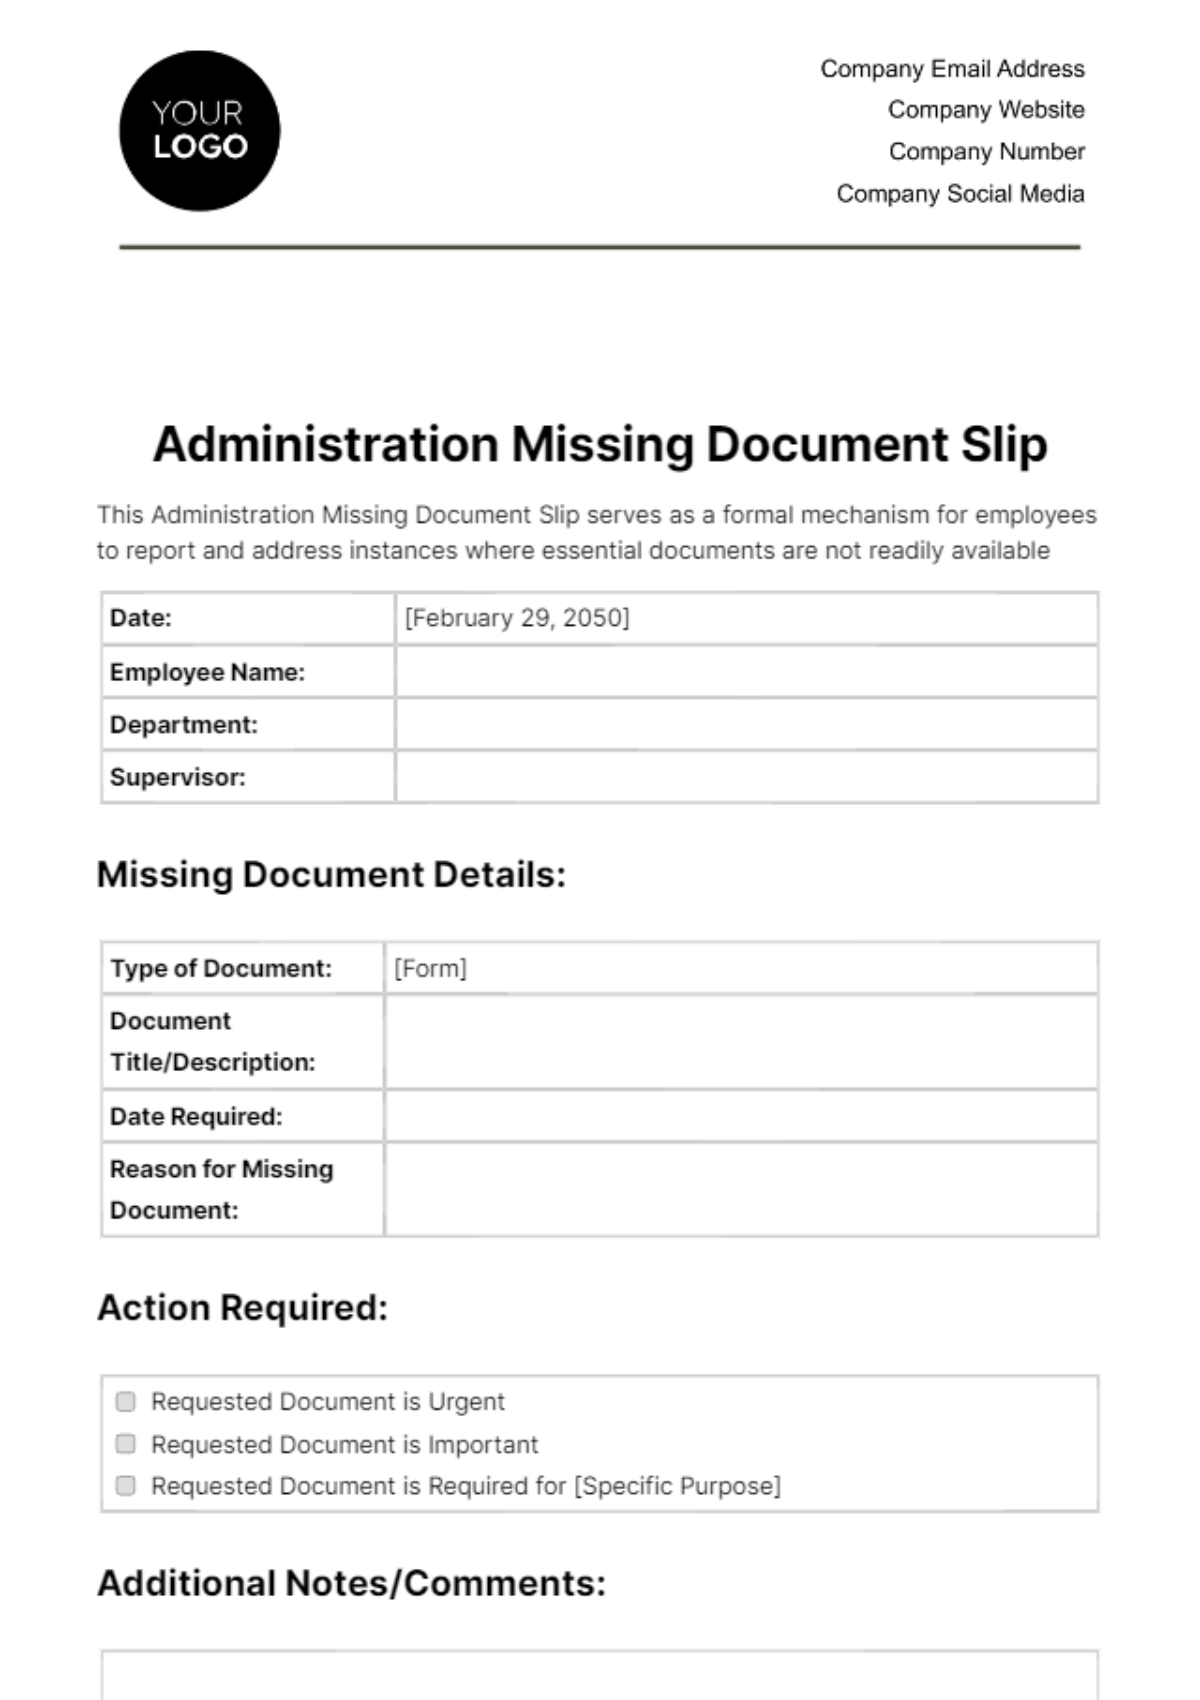 Administration Missing Document Slip Template